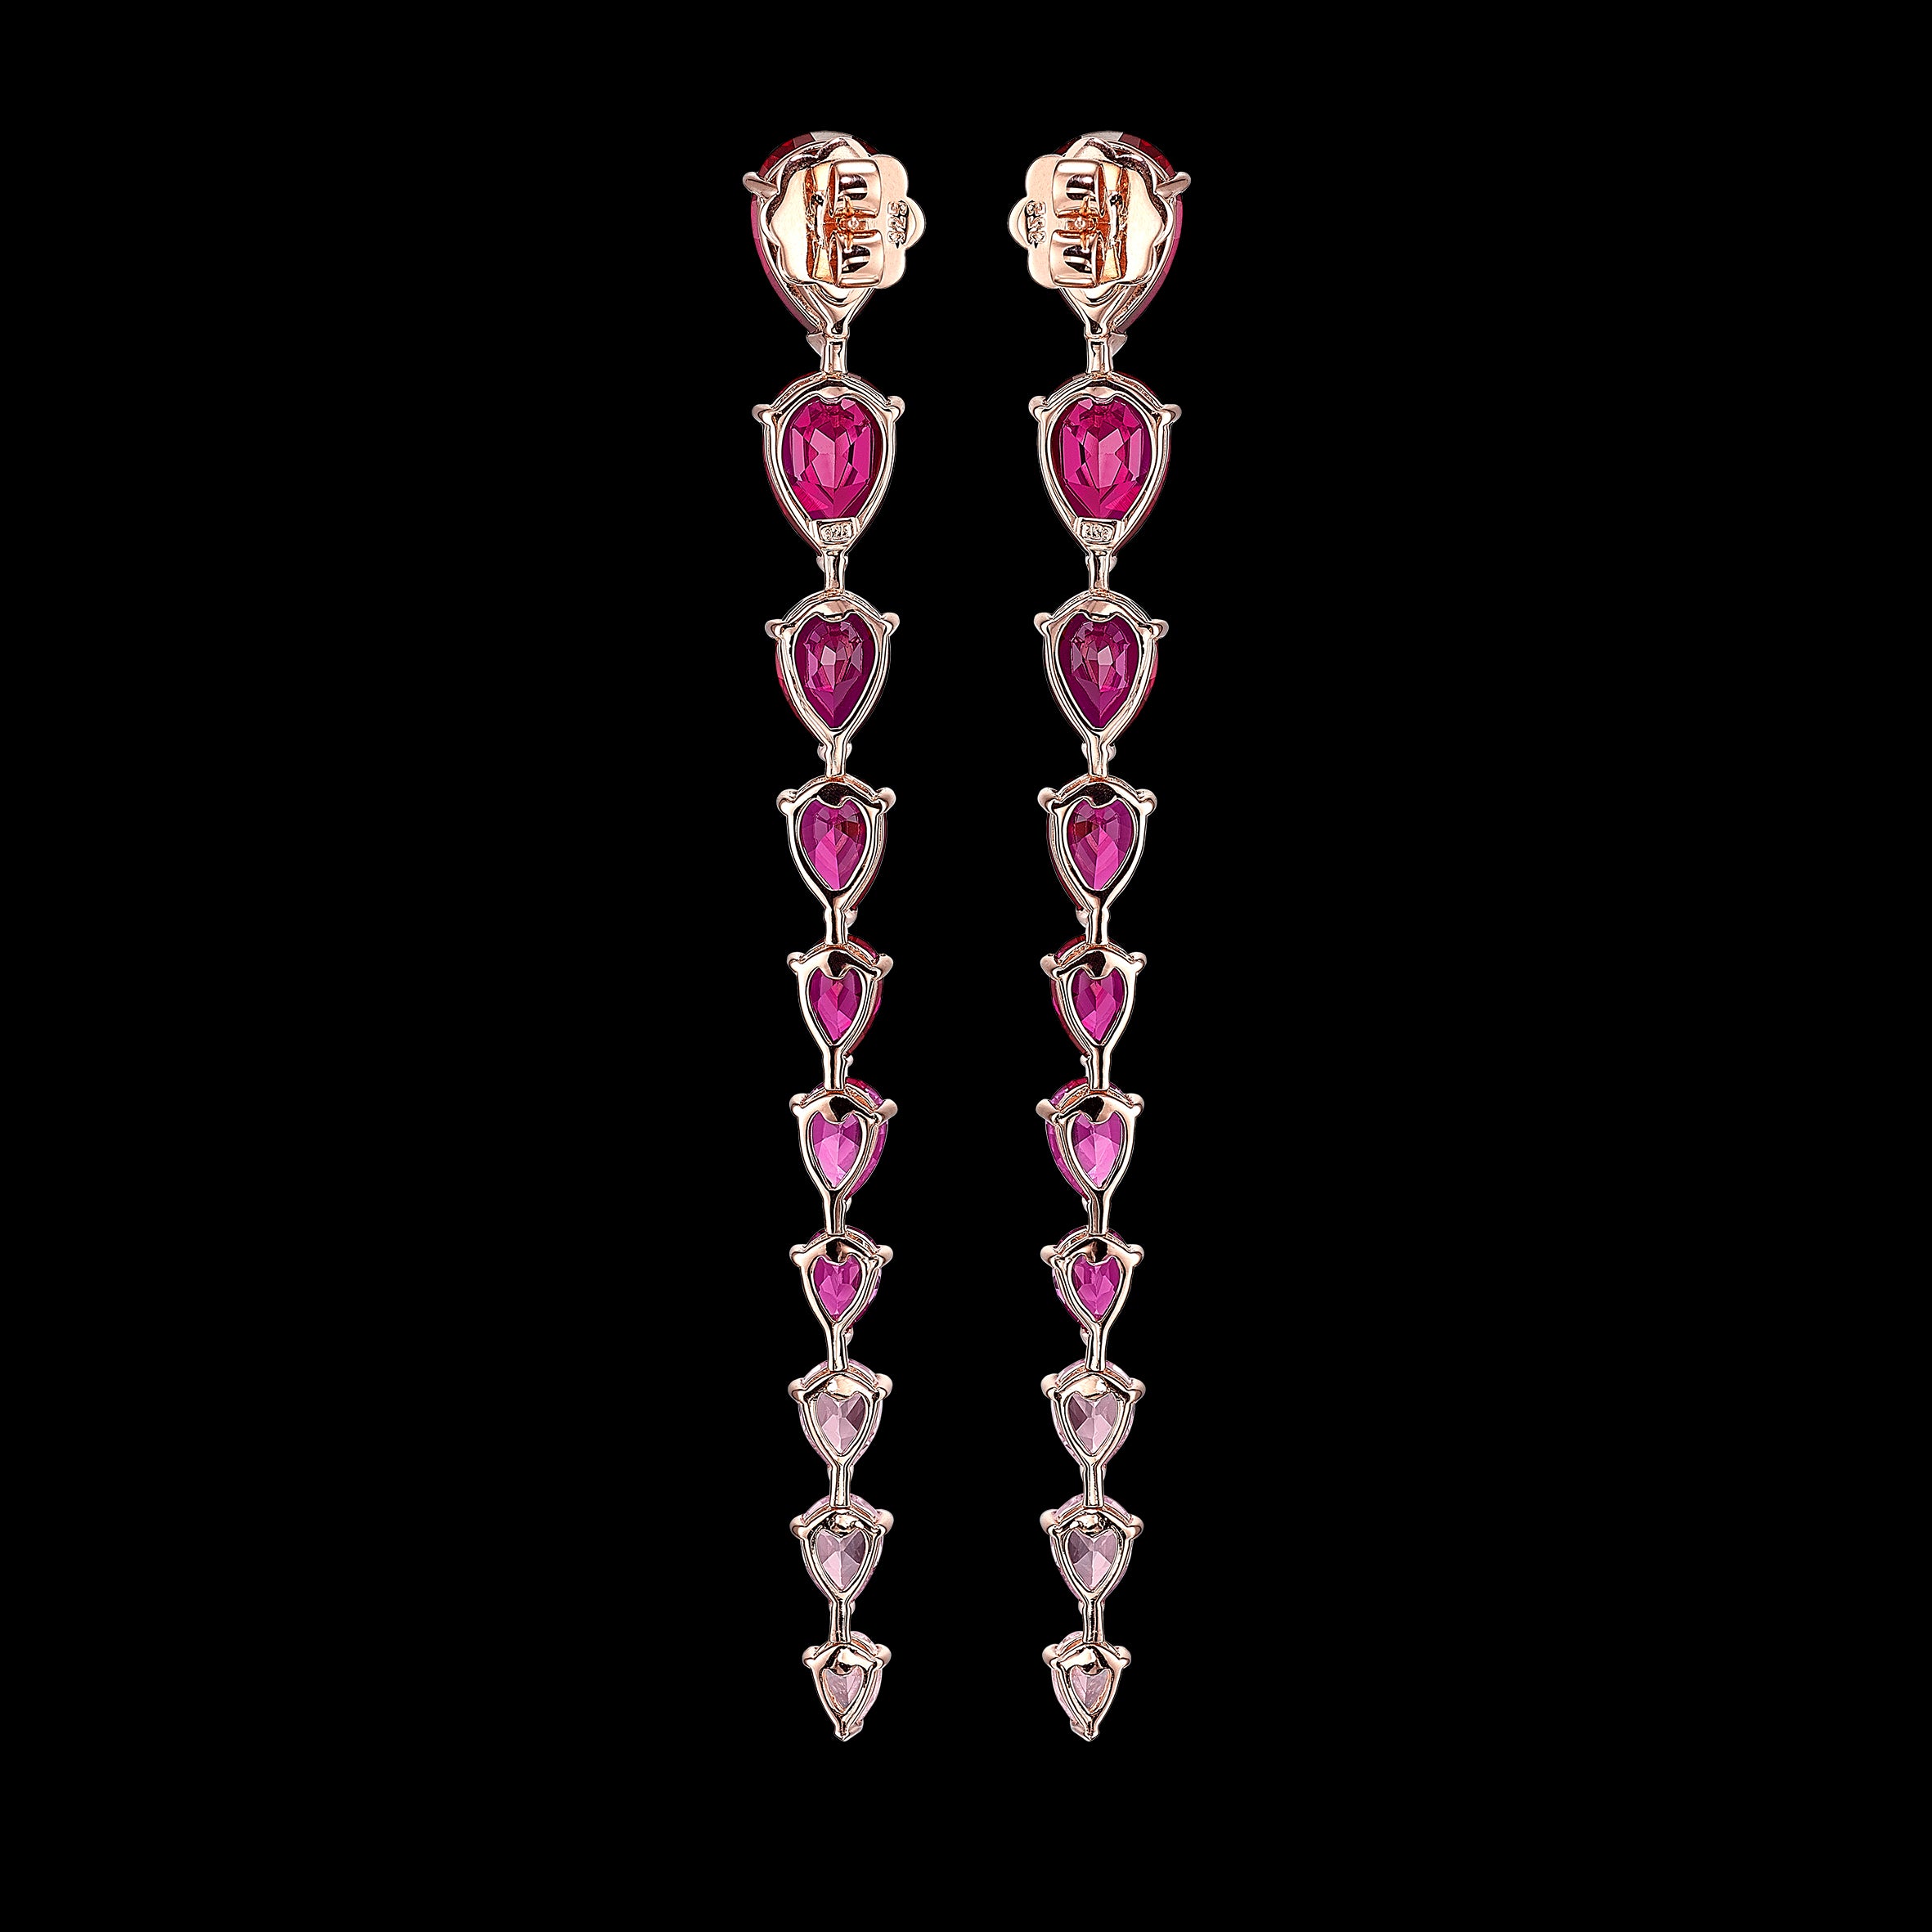 Fuchsia Nova Earrings, Earrings, Anabela Chan Joaillerie - Fine jewelry with laboratory grown and created gemstones hand-crafted in the United Kingdom. Anabela Chan Joaillerie is the first fine jewellery brand in the world to champion laboratory-grown and created gemstones with high jewellery design, artisanal craftsmanship and a focus on ethical and sustainable innovations.